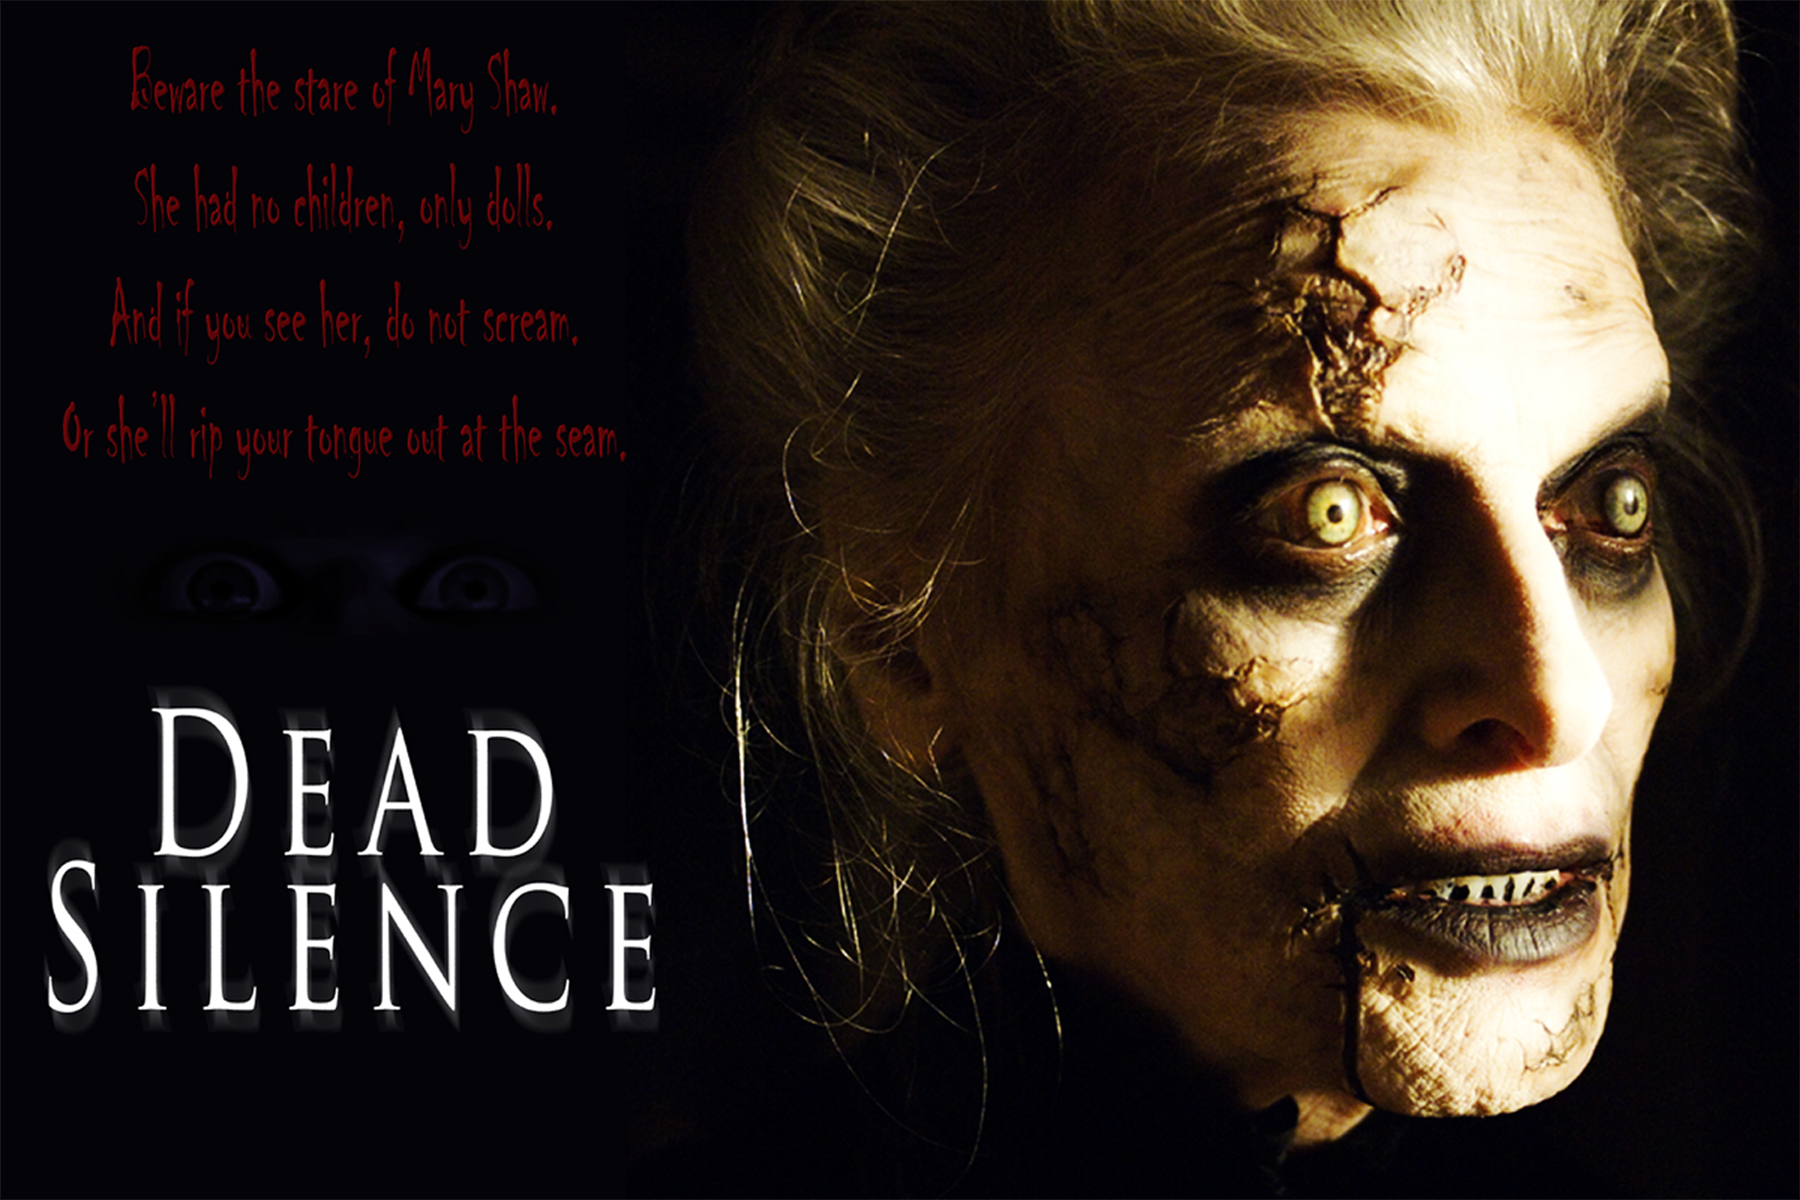 Dead Silence Entry No By Melhuff Contests